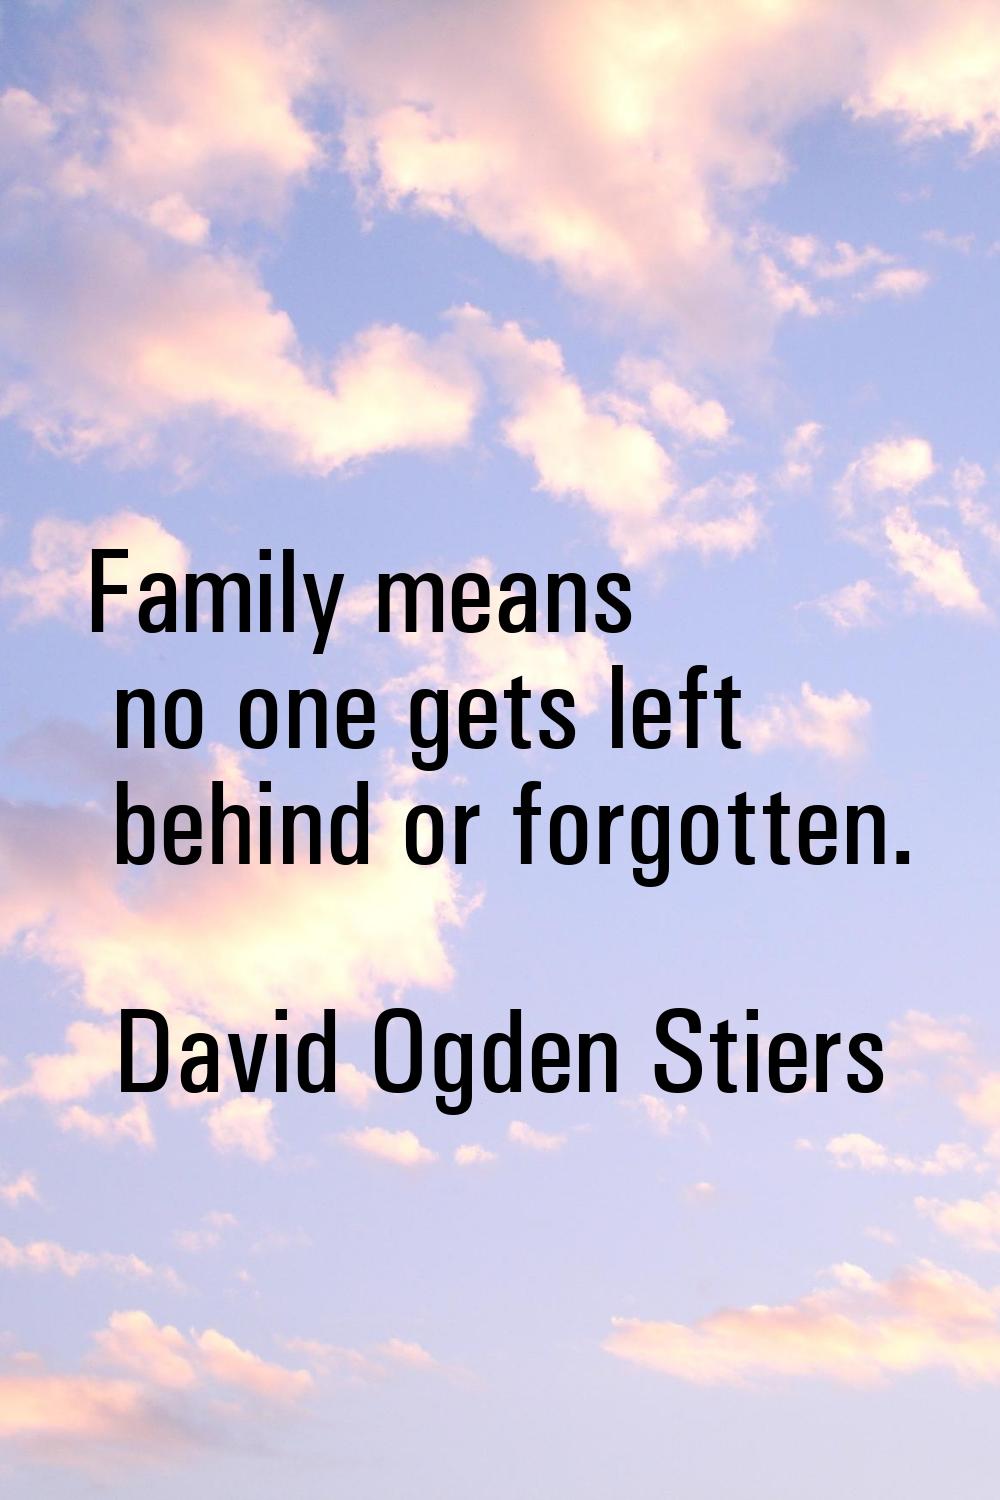 Family means no one gets left behind or forgotten.